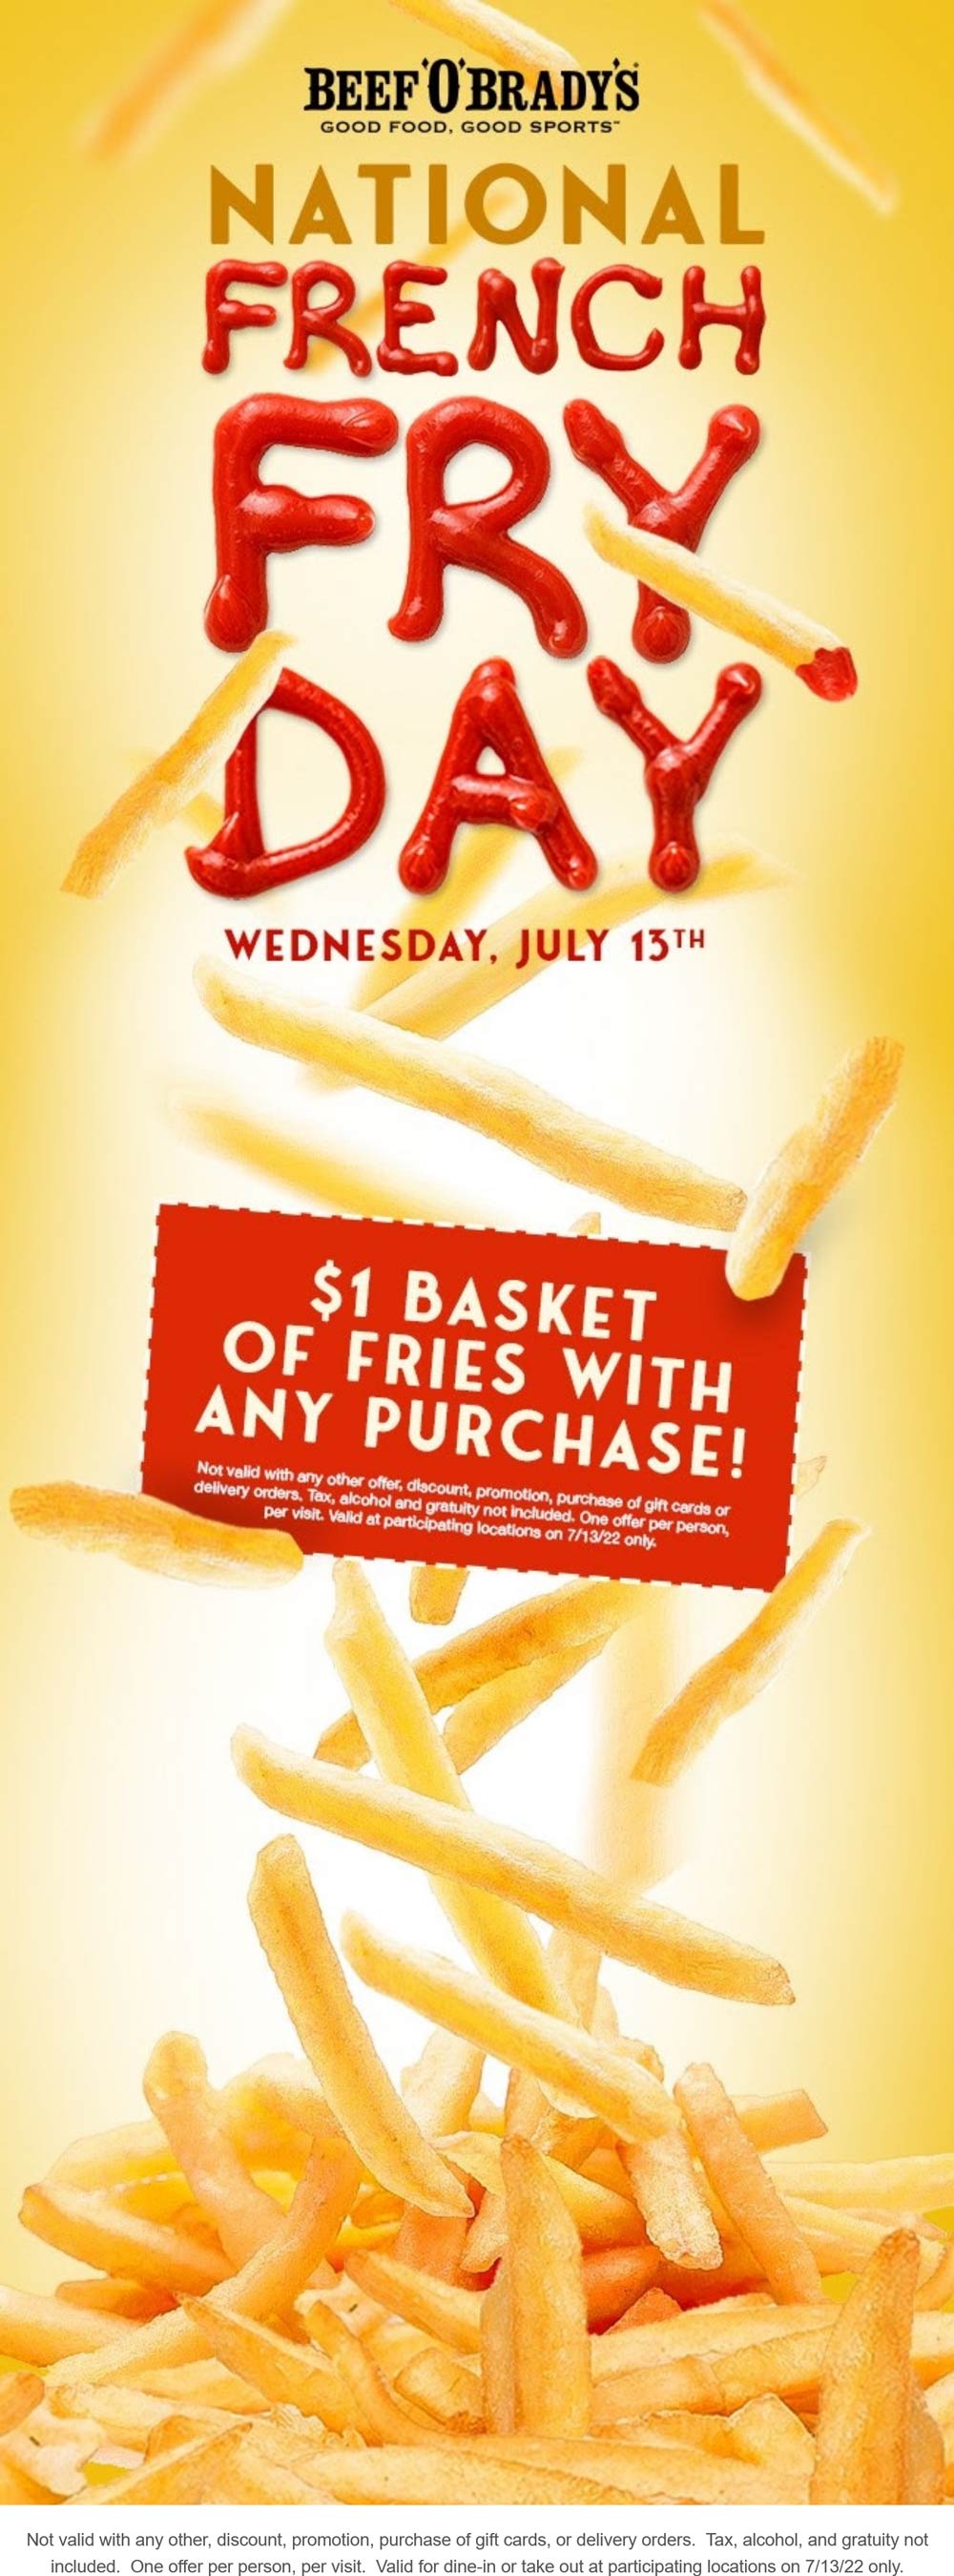 Beef OBradys restaurants Coupon  $1 basket of fries with your purchase today at Beef OBradys restaurants #beefobradys 